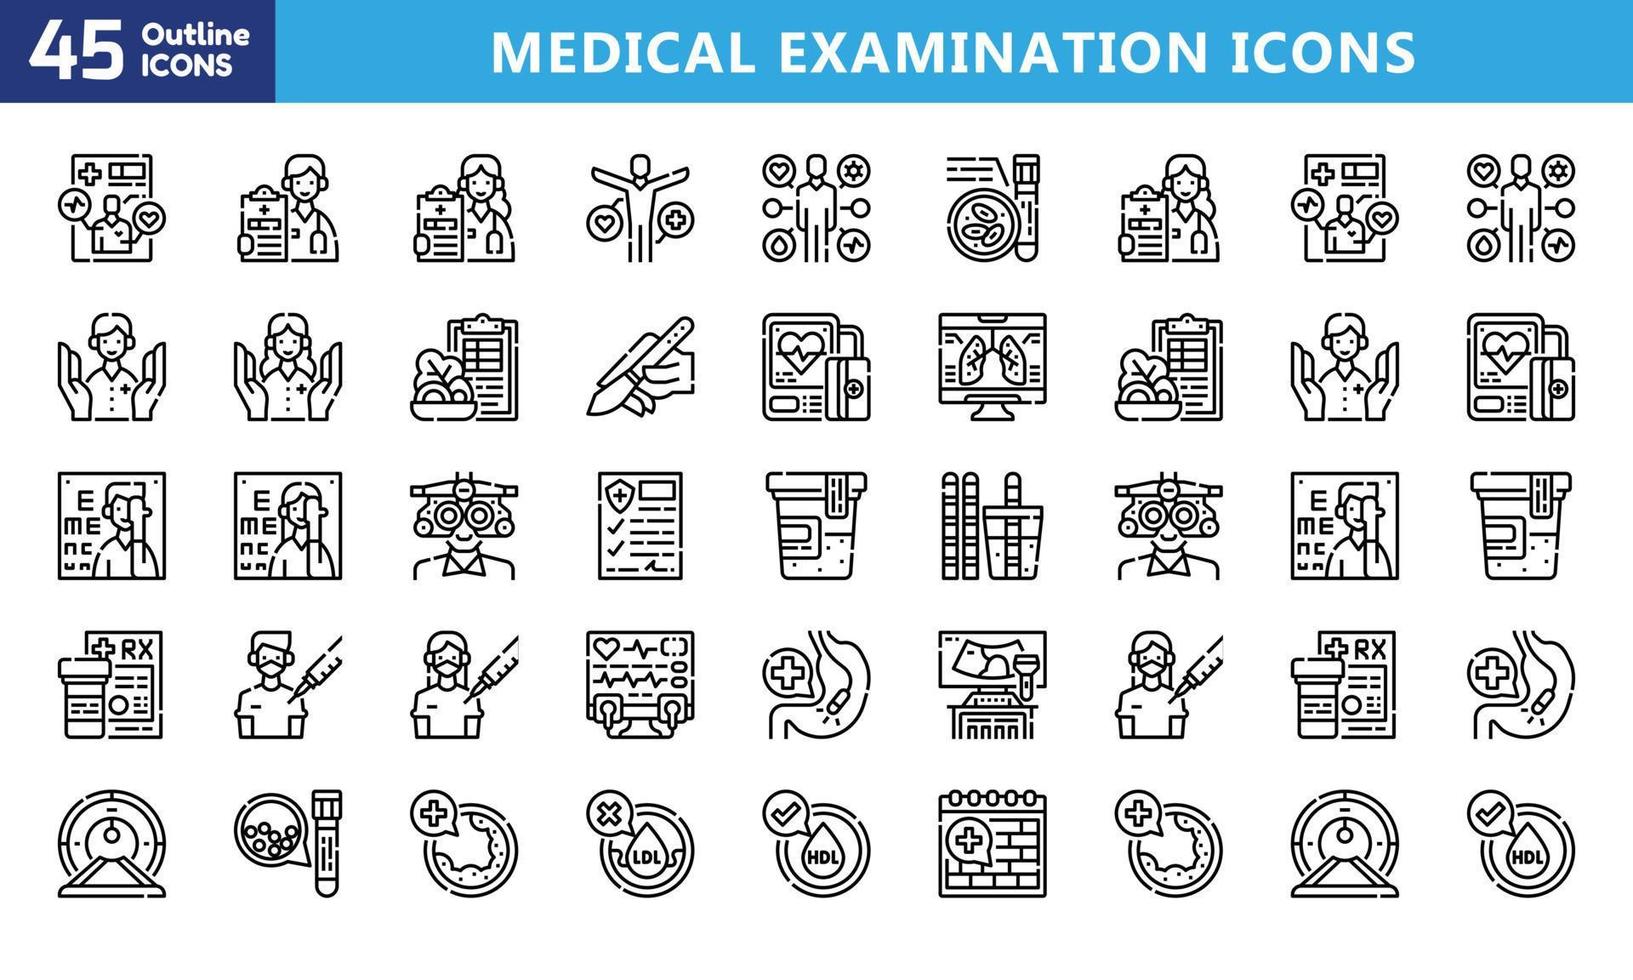 Icons for mobile and web. High quality pictograms. Linear icons set of business, medical, UI and UX, media, money, travel, etc. vector